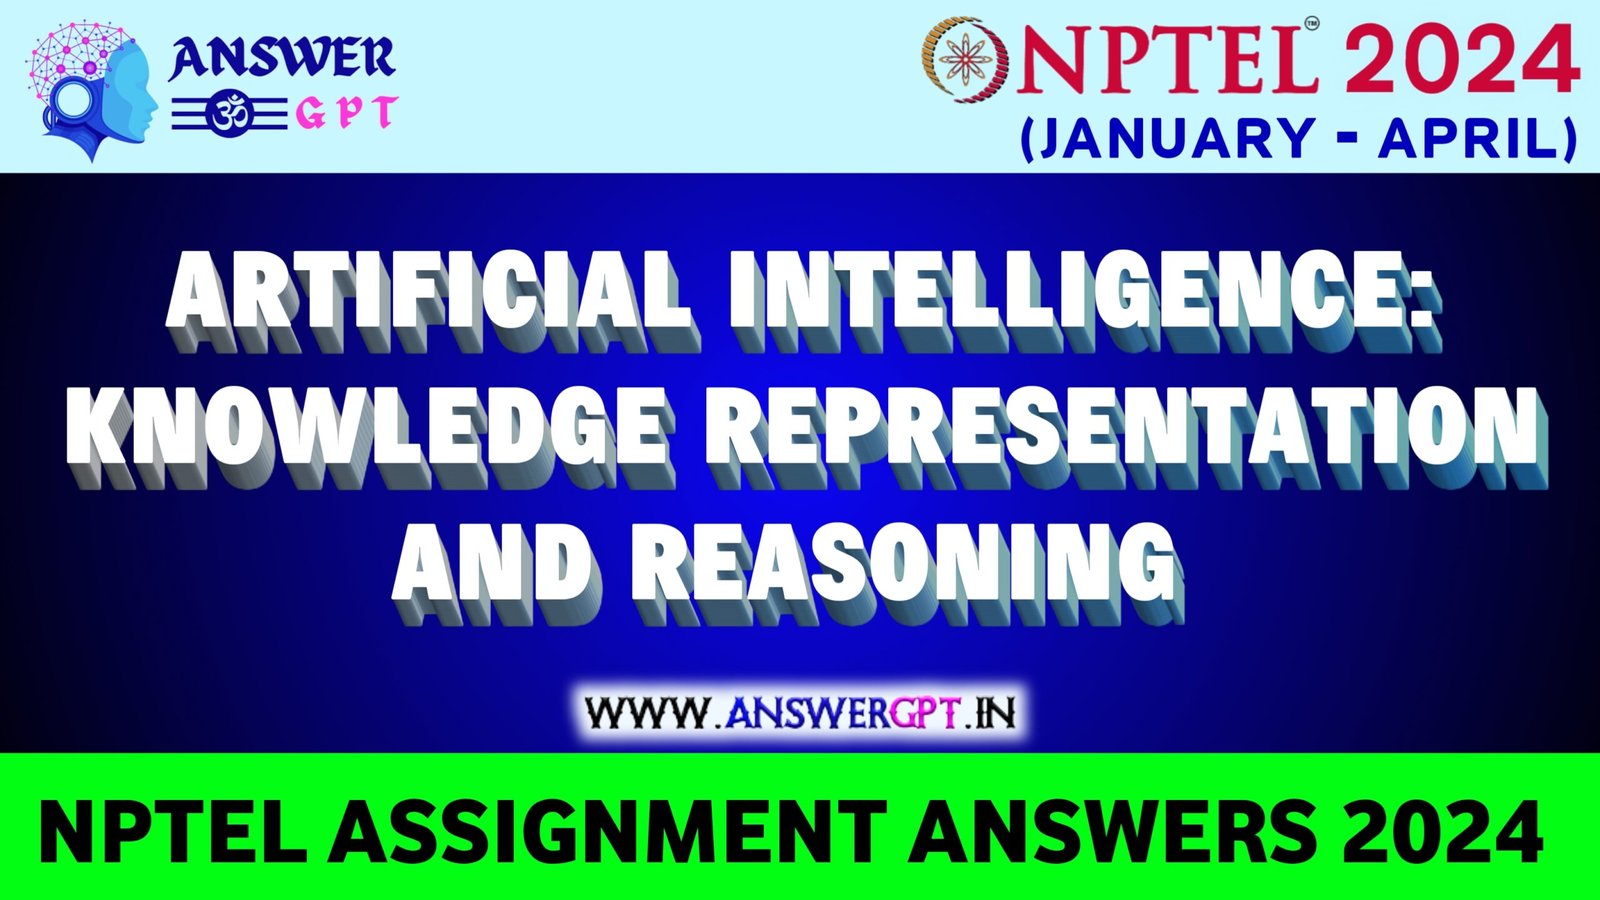 [Week 1-12] NPTEL Artificial Intelligence: Knowledge Representation And Reasoning Assignment Answers 2024